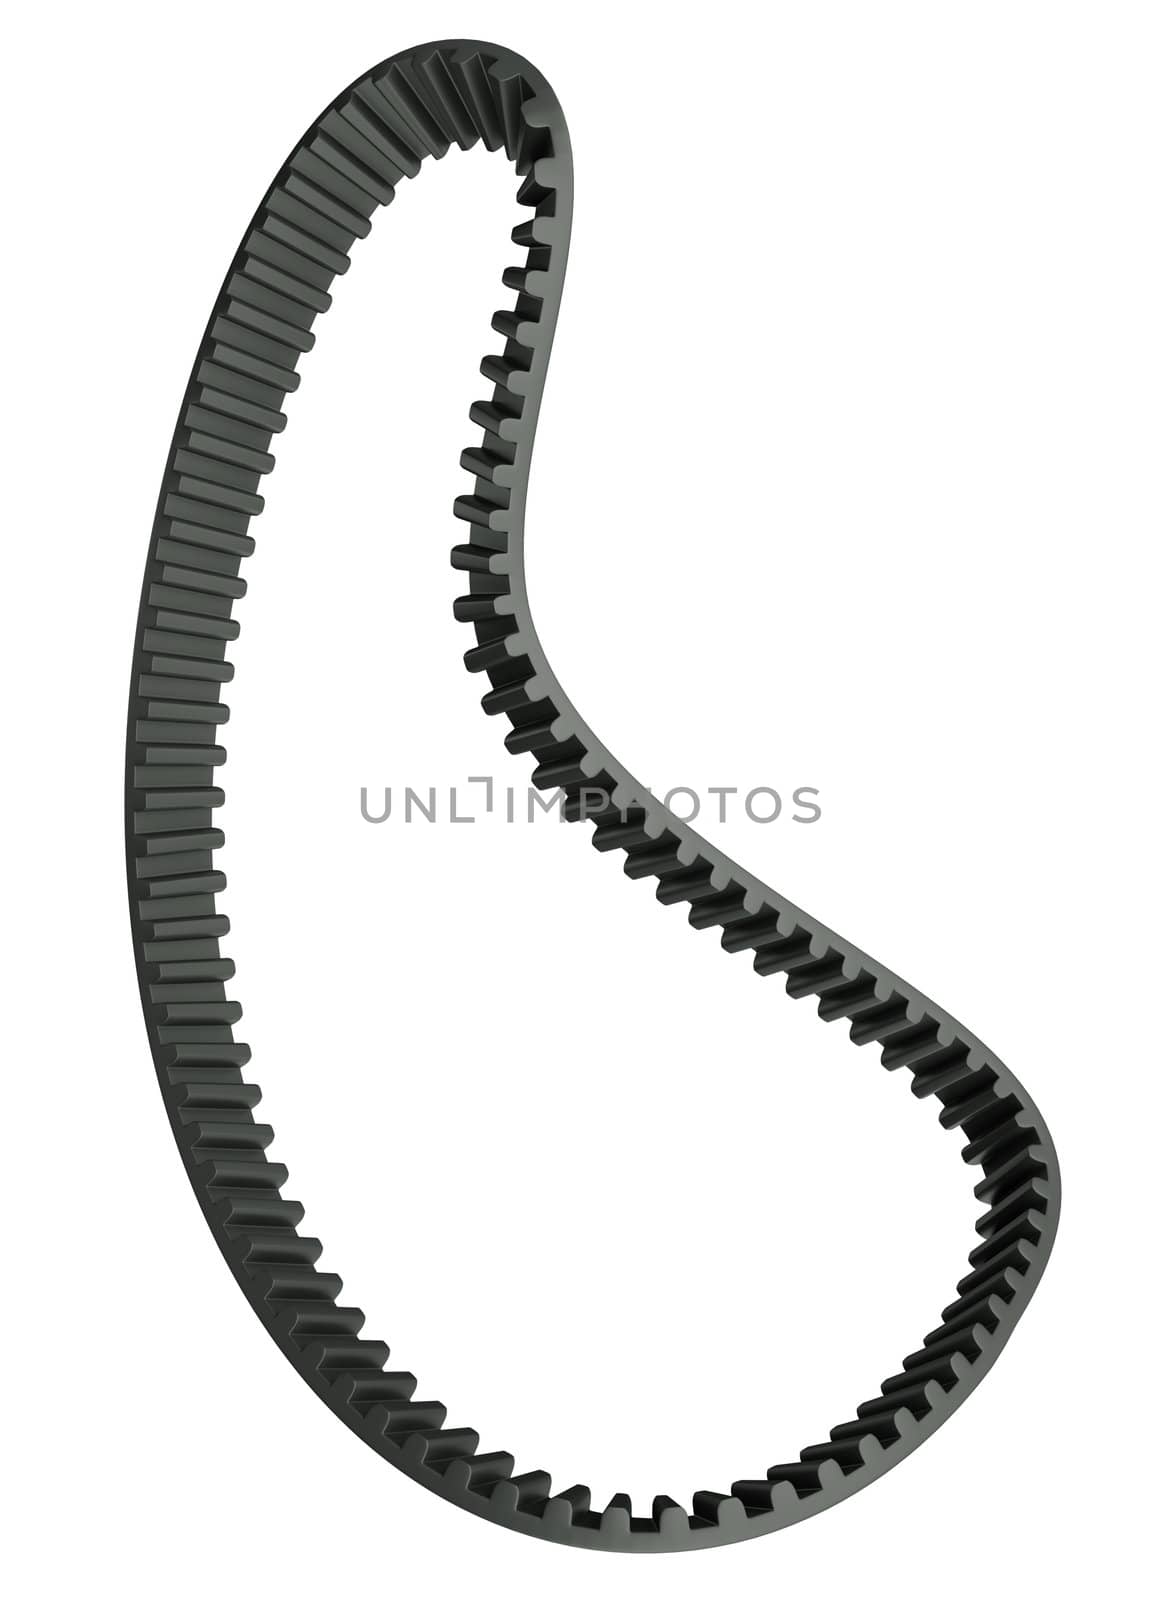 Timing belt, internal part of car engines, isolated on white backgound.3D rendered illustration.